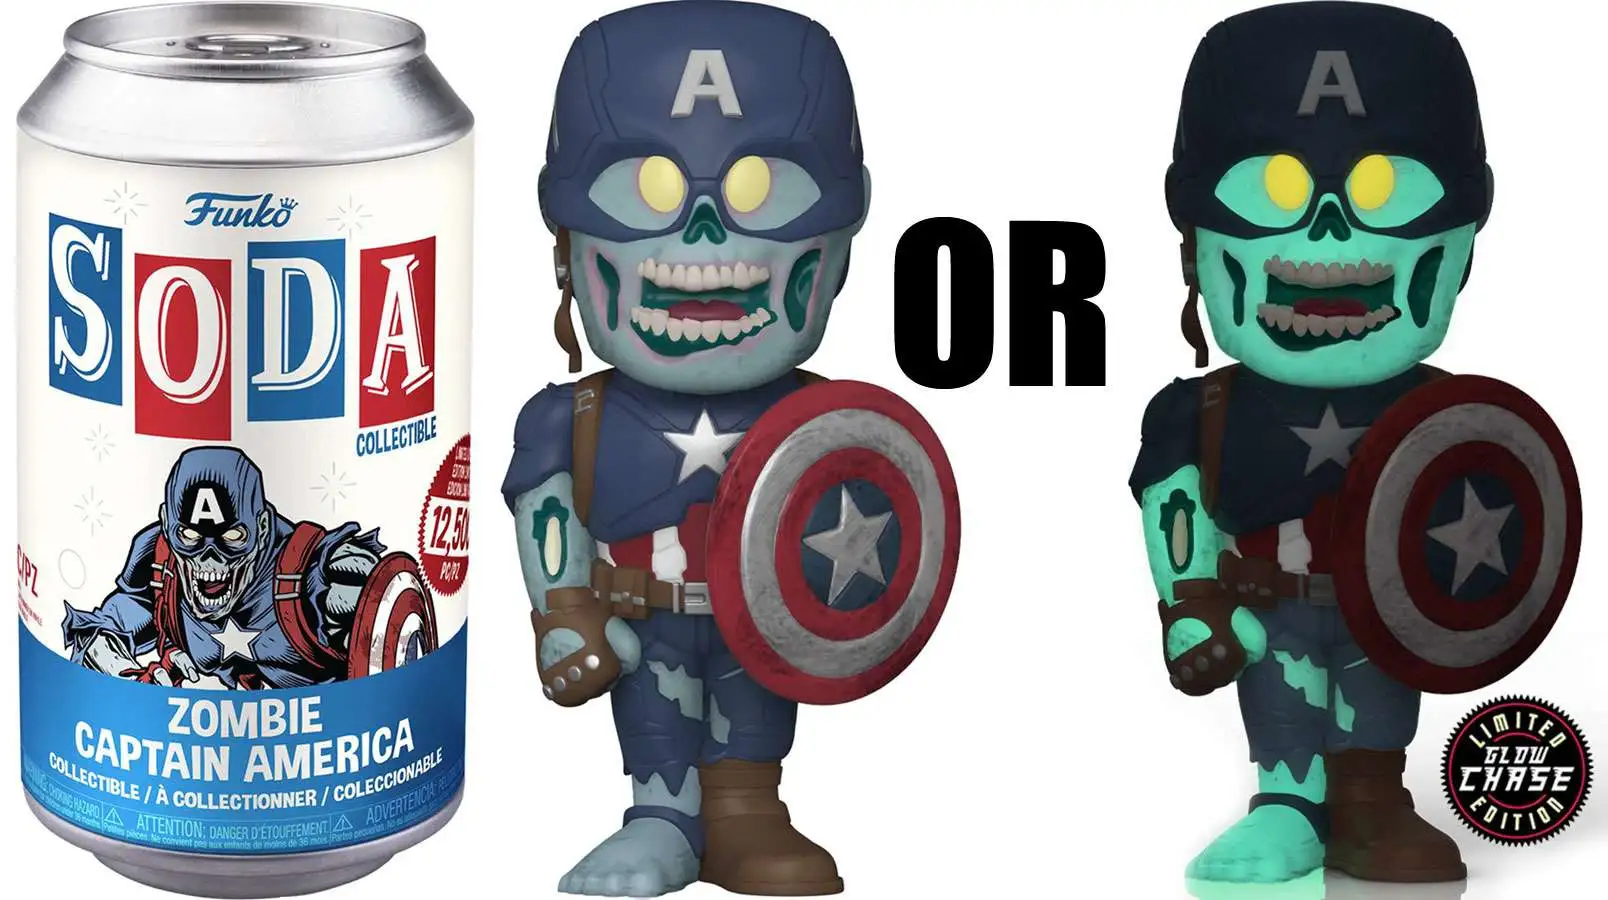 Funko Marvel What If? Vinyl Soda Zombie Captain America Limited Edition of 12,500! Figure [1 RANDOM Figure, Look For The Chase!]